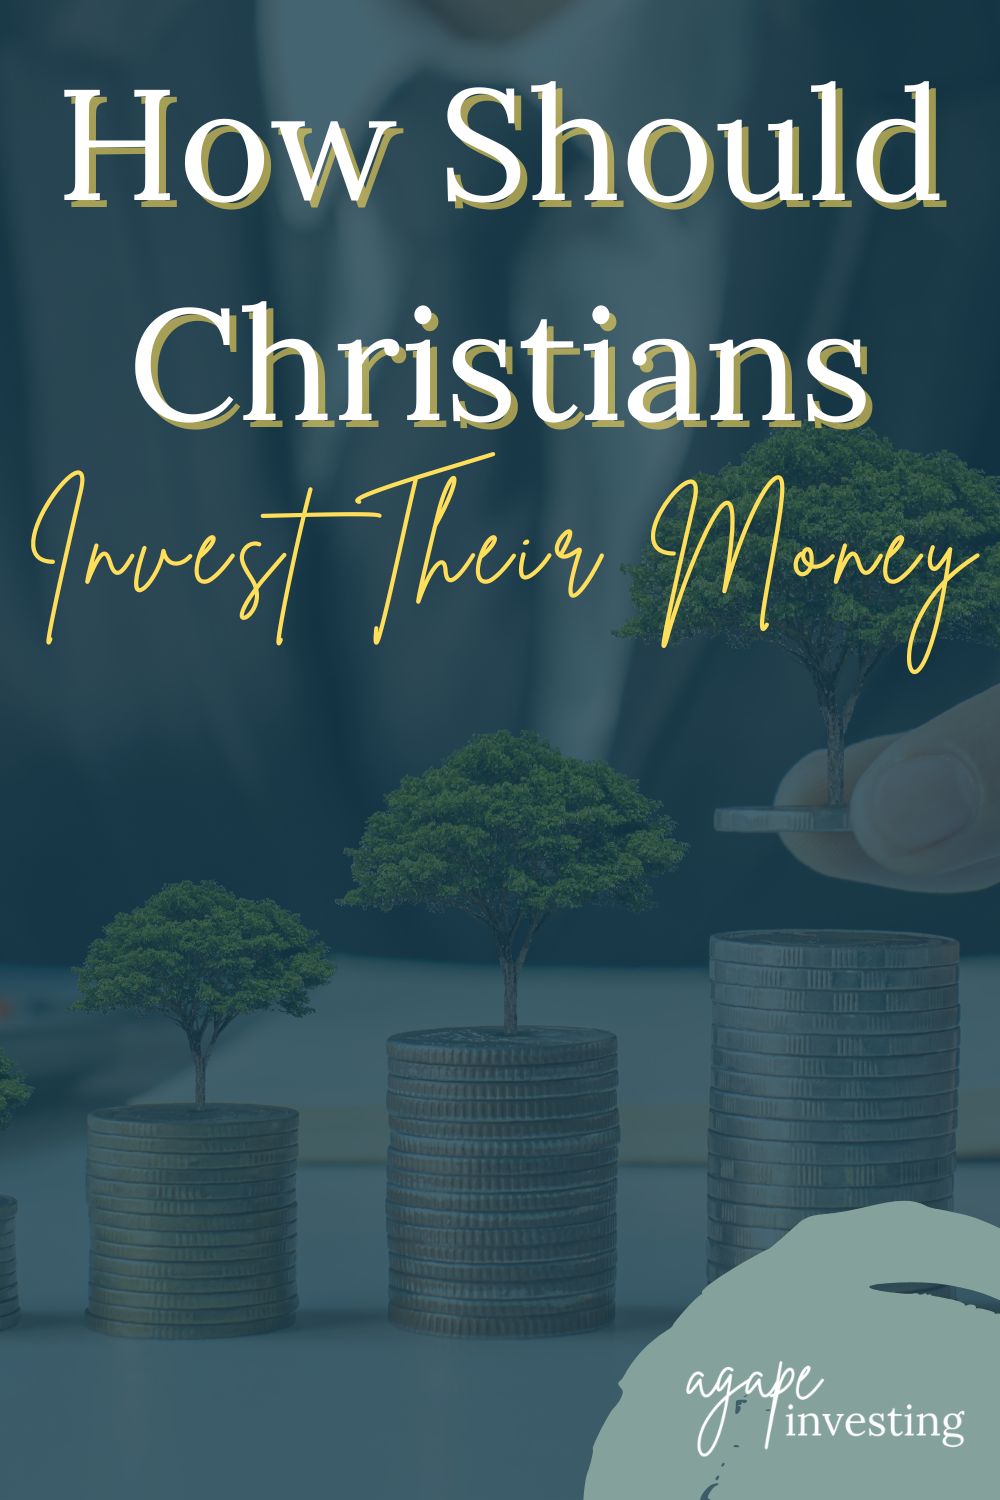 For the majority of us, investing is a way to prepare for retirement, therefore, what you believe and think about retirement will truly affect how you invest your money. What then is our purpose when it comes to investing? How should Christians invest their money?